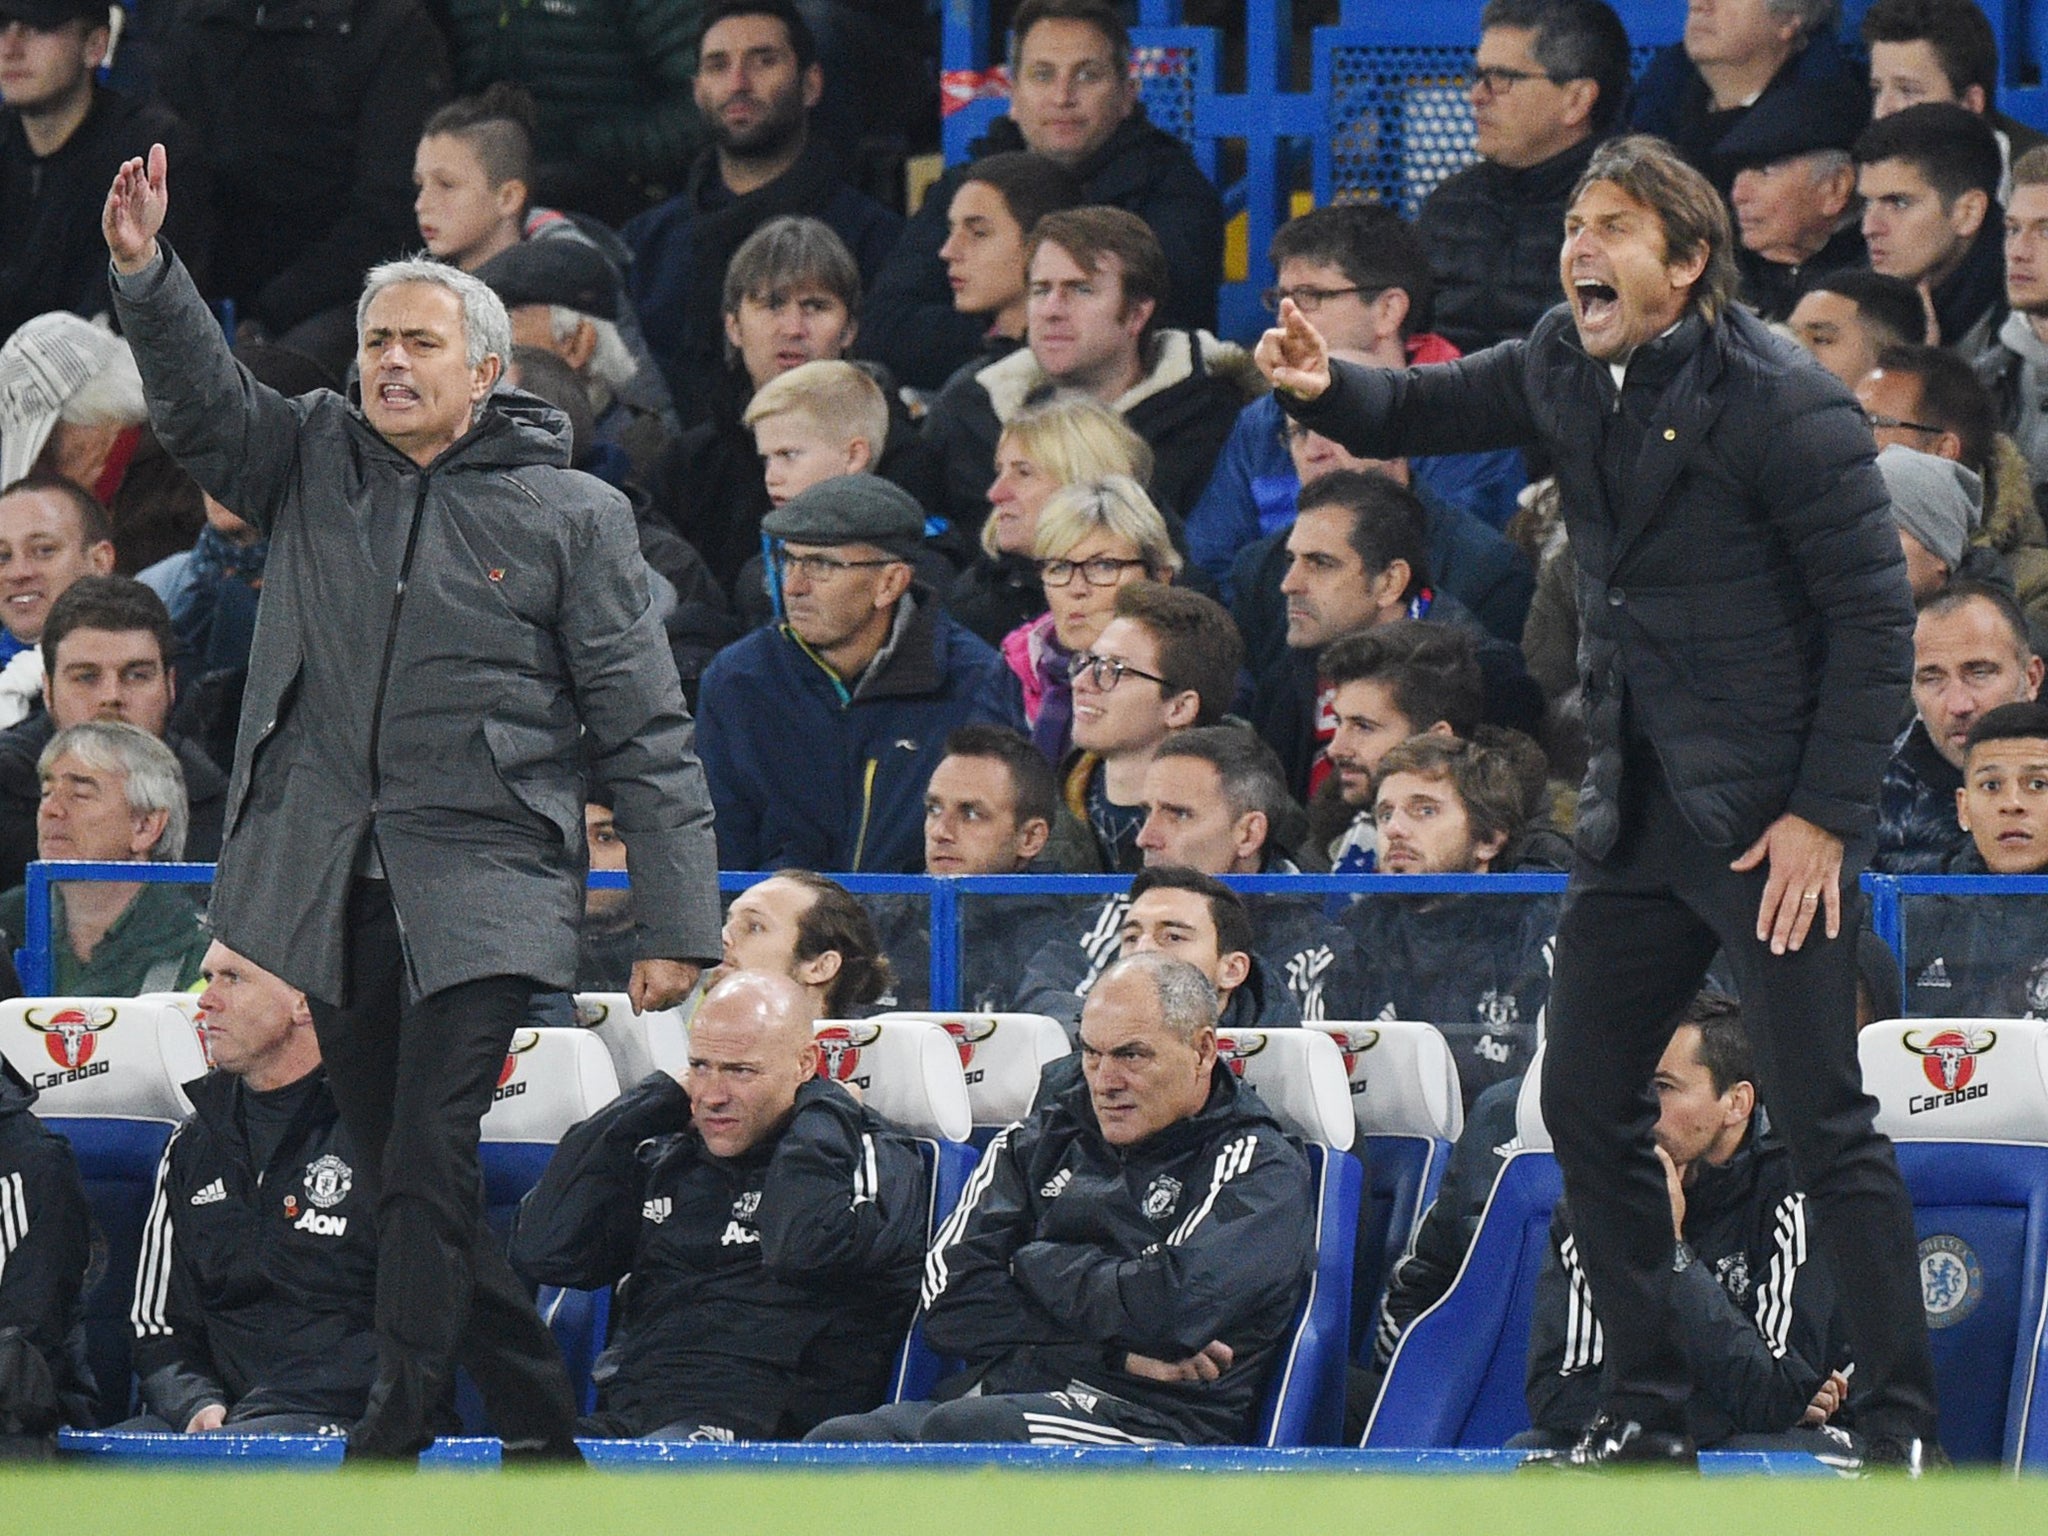 Antonio Conte decided not to shake hands with Manchester United rival Jose Mourinho